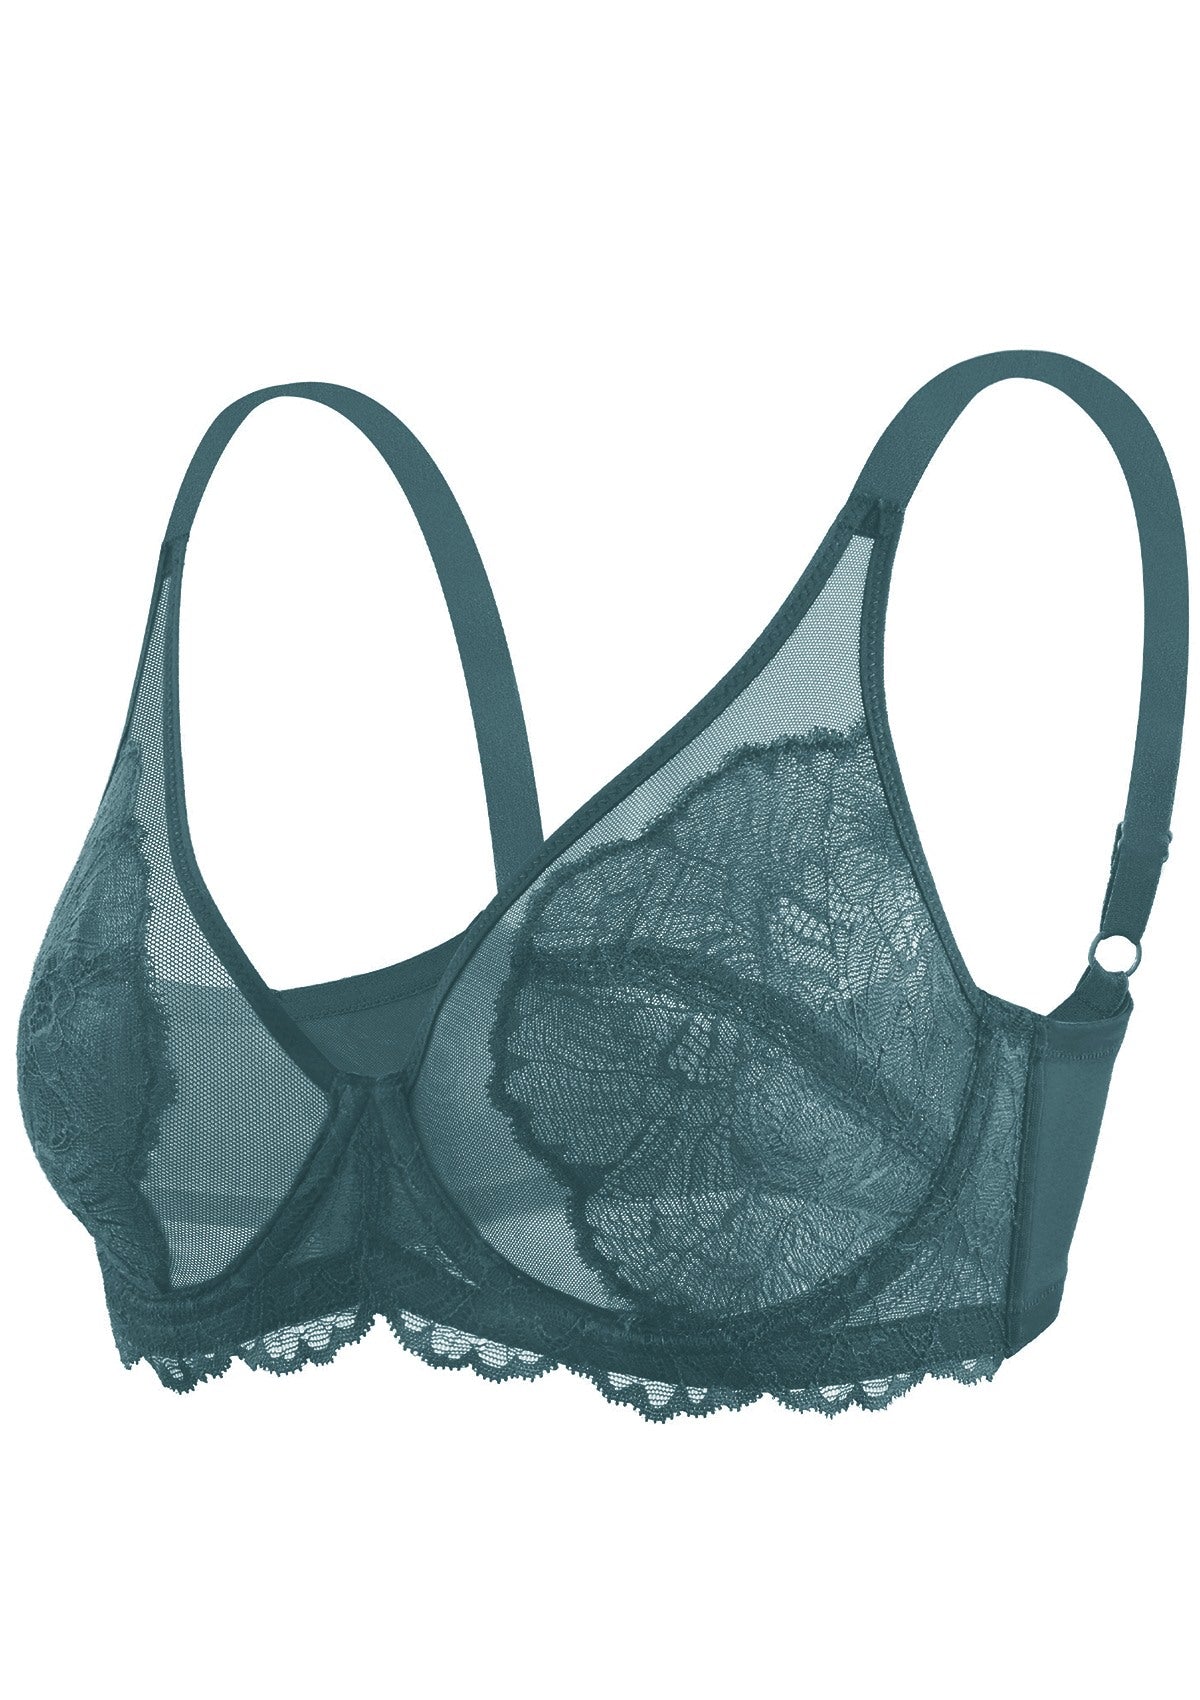 HSIA Blossom Full Figure See-Through Lace Bra For Side And Back Fat - Balsam Blue / 34 / H